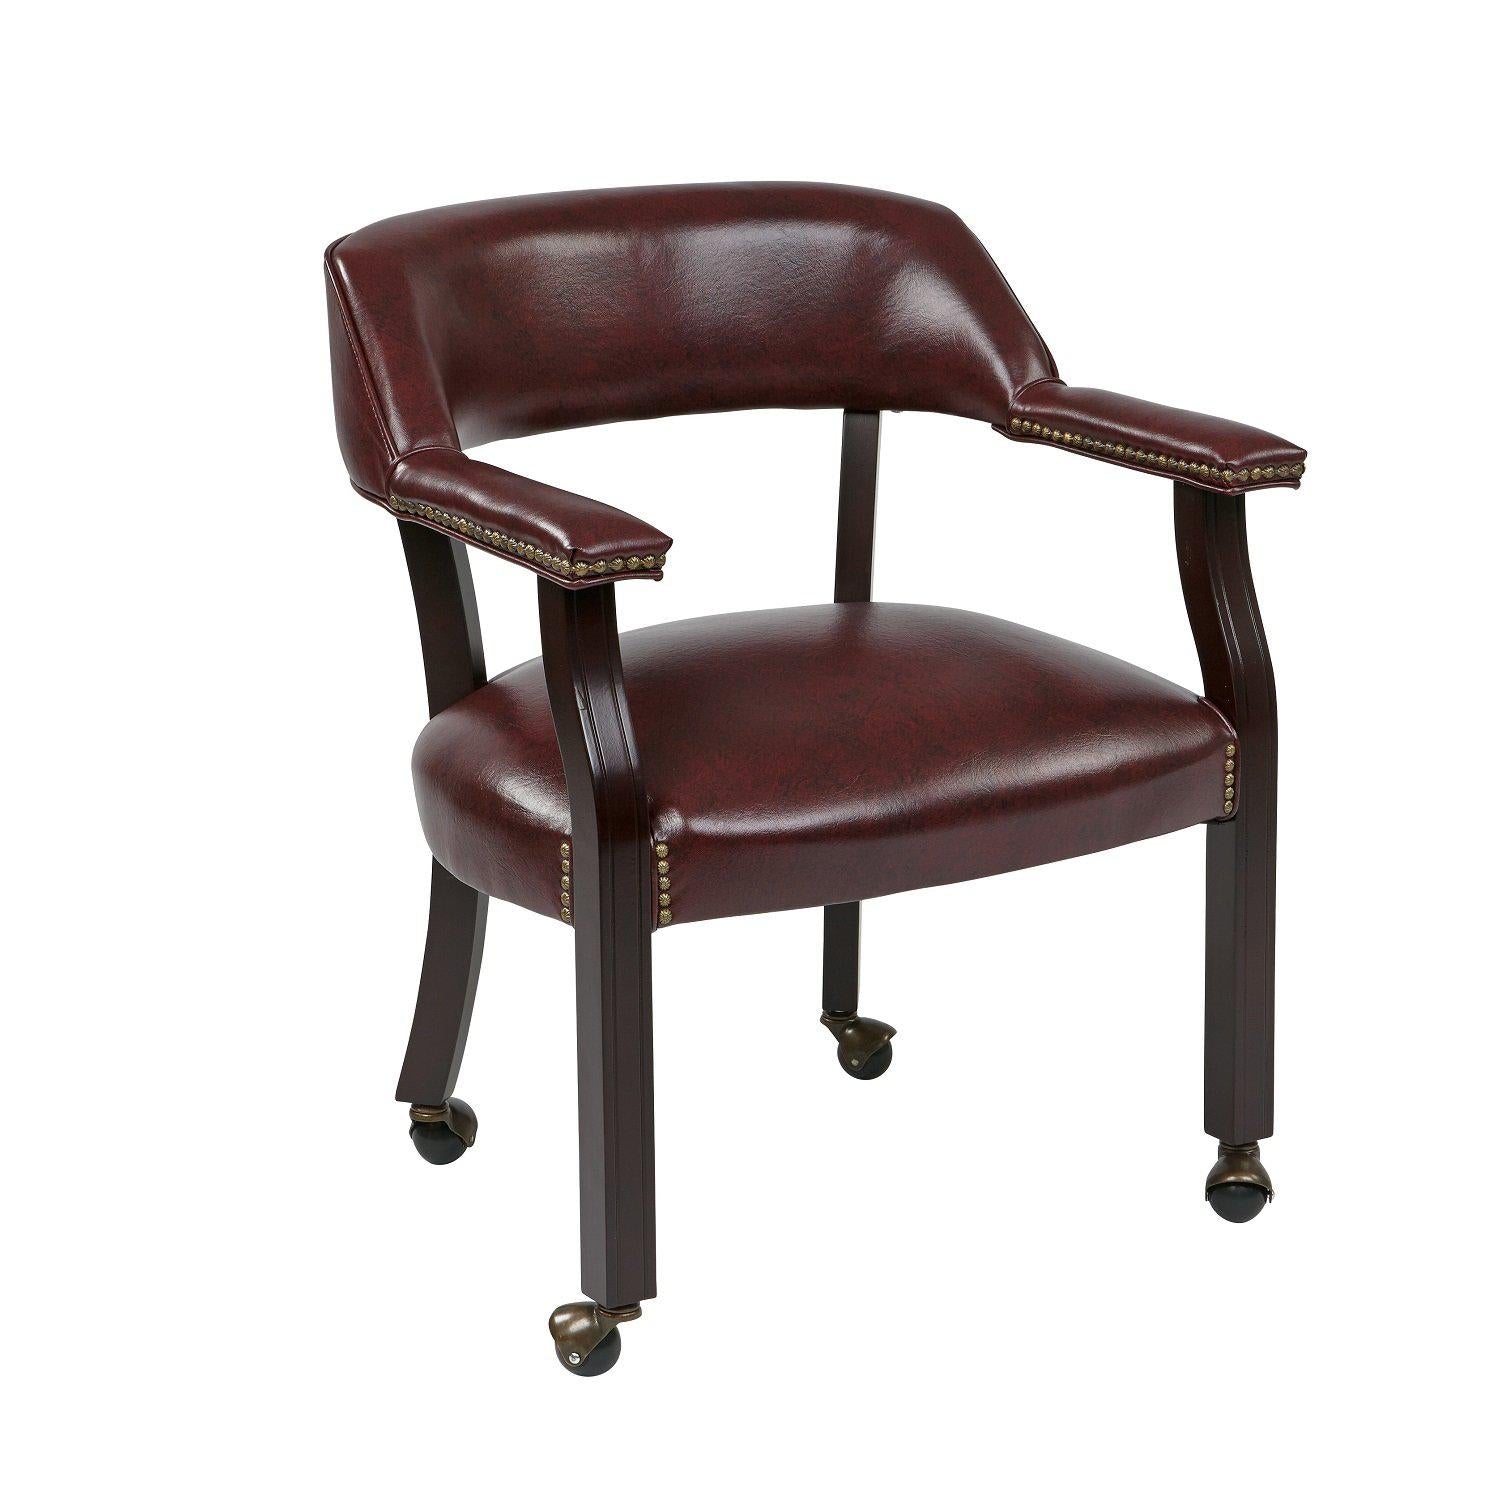 Traditional Guest Chair with Wrap Around Back and casters, Oxblood Vinyl Upholstery